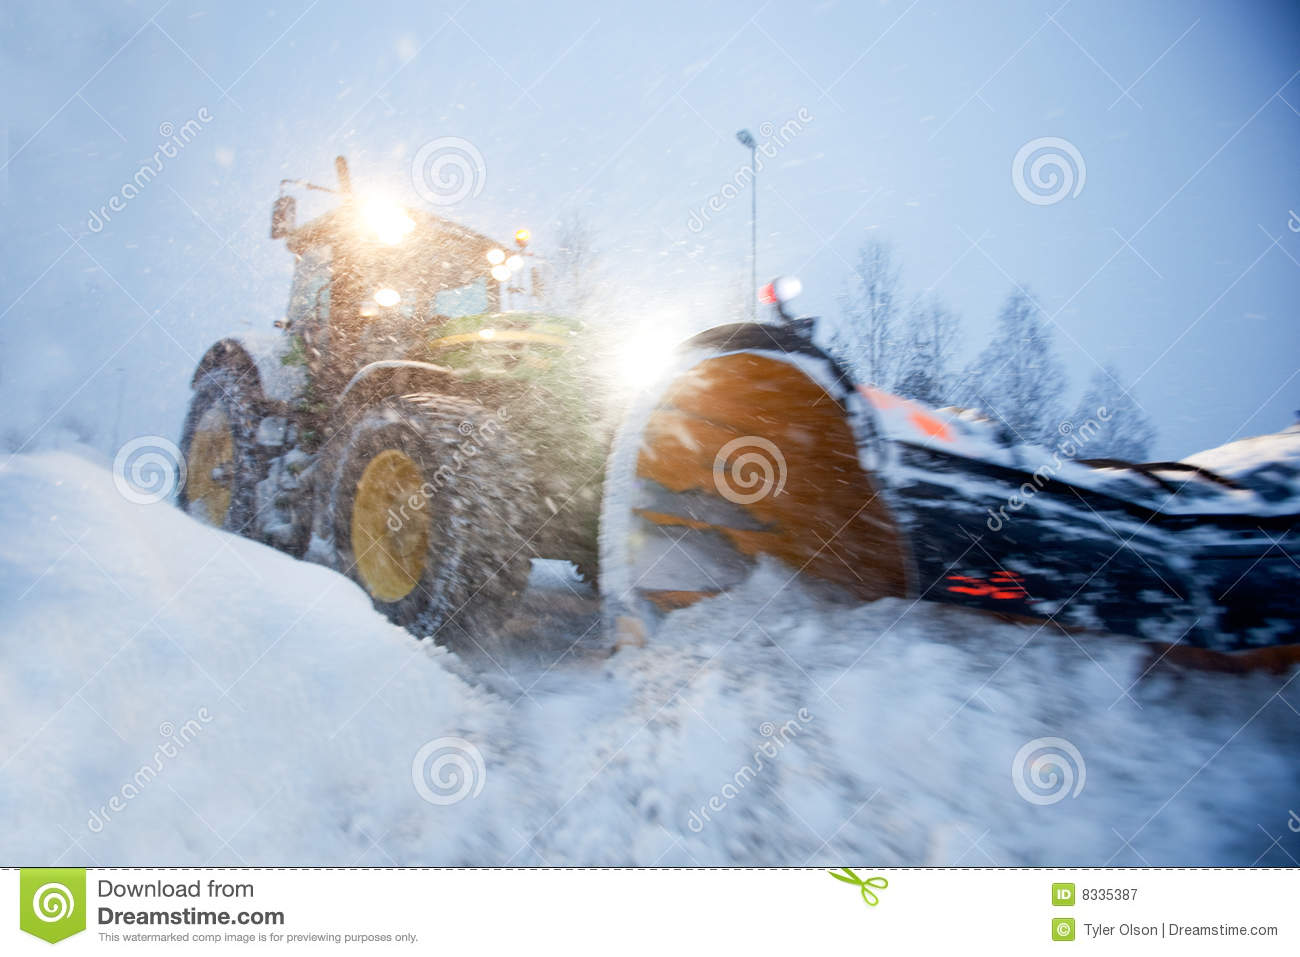 Snow Plow Clearing A Road In Winter